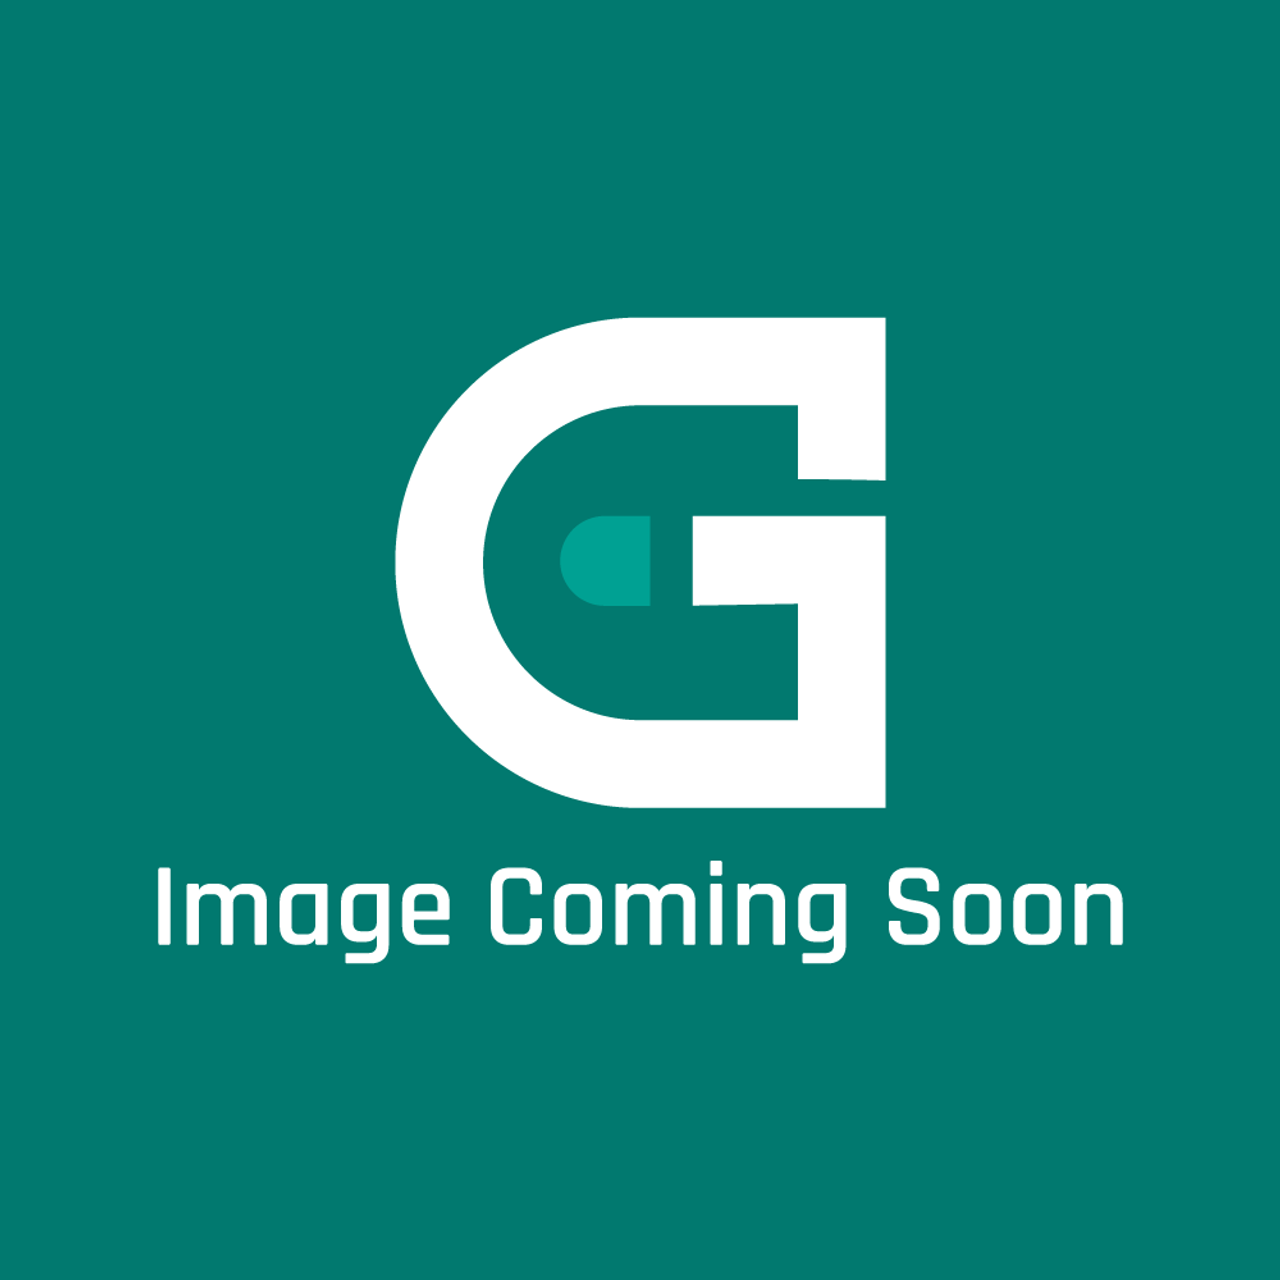 AGA Marvel AE1M231406 - Electrical Control Tray (Room Vent) - Us - Image Coming Soon!